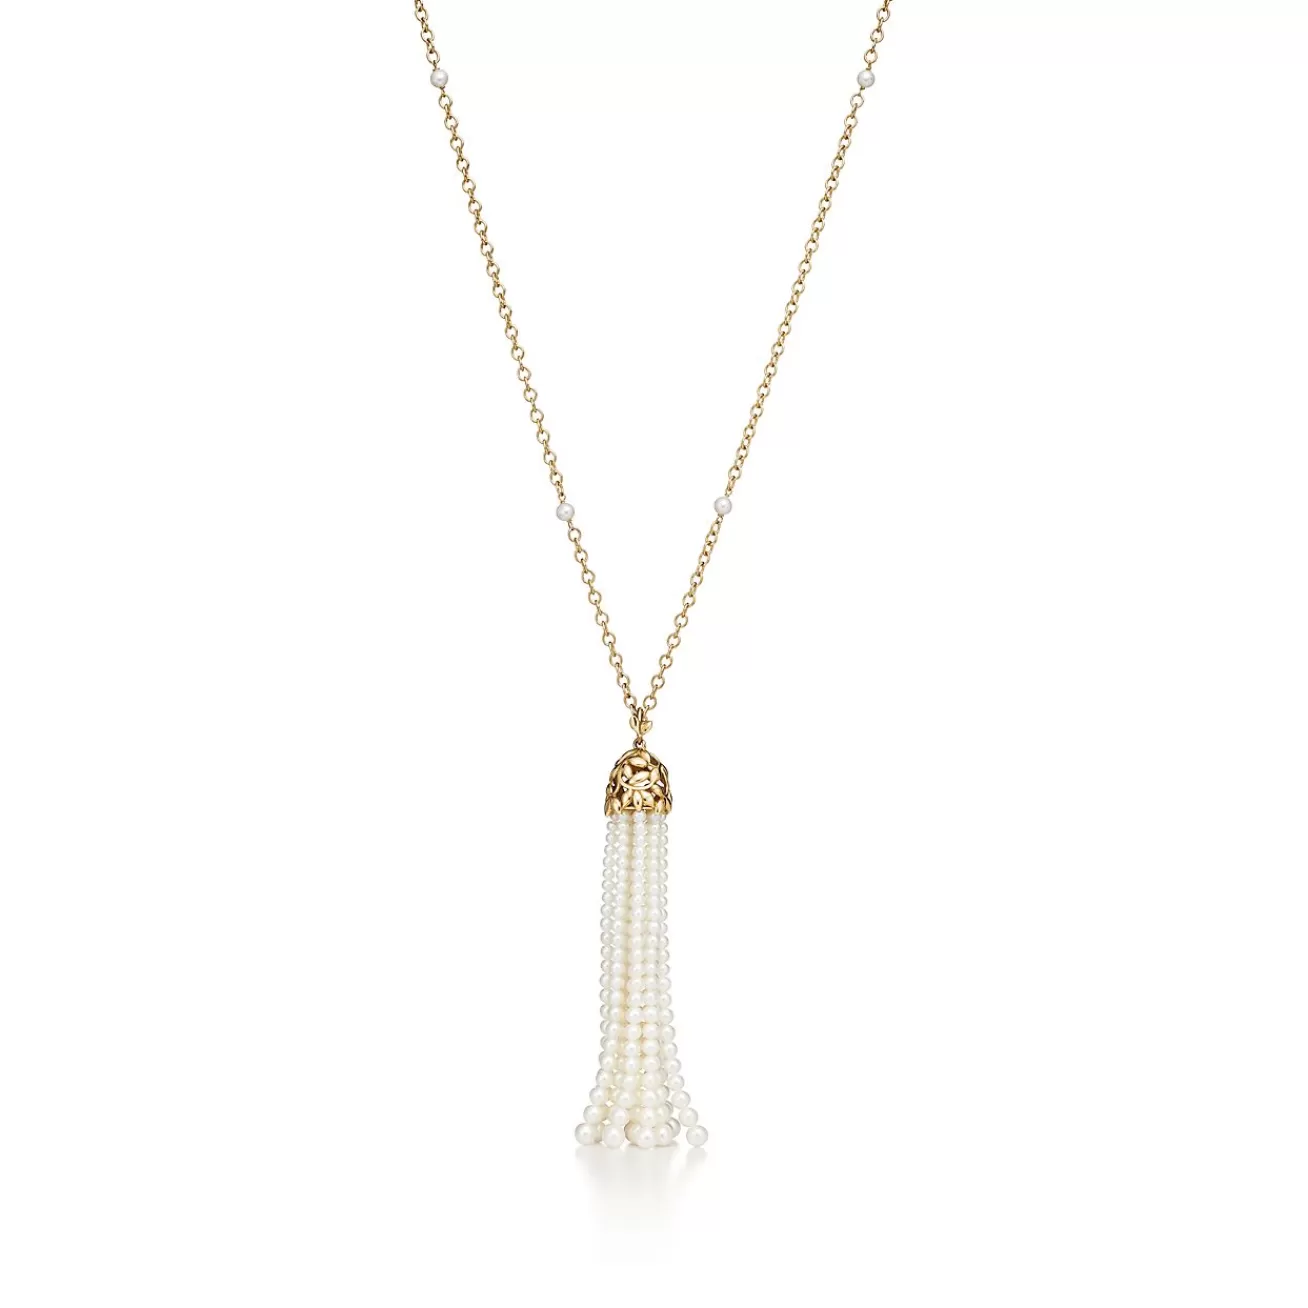 Tiffany & Co. Paloma Picasso® Olive Leaf tassel necklace in 18k gold with pearls, large. | ^ Necklaces & Pendants | Gold Jewelry